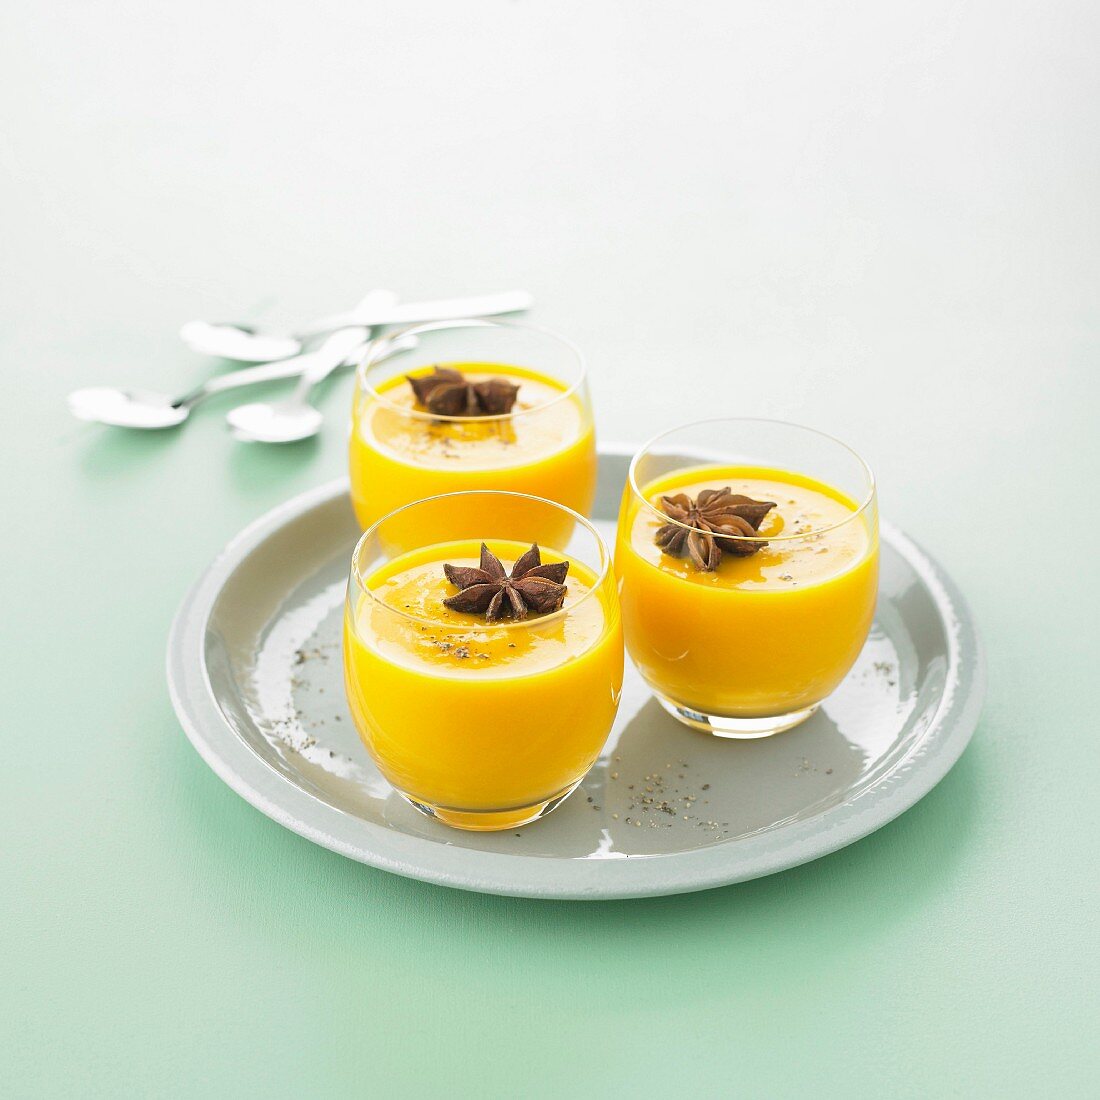 Carrot gazpacho with star anise